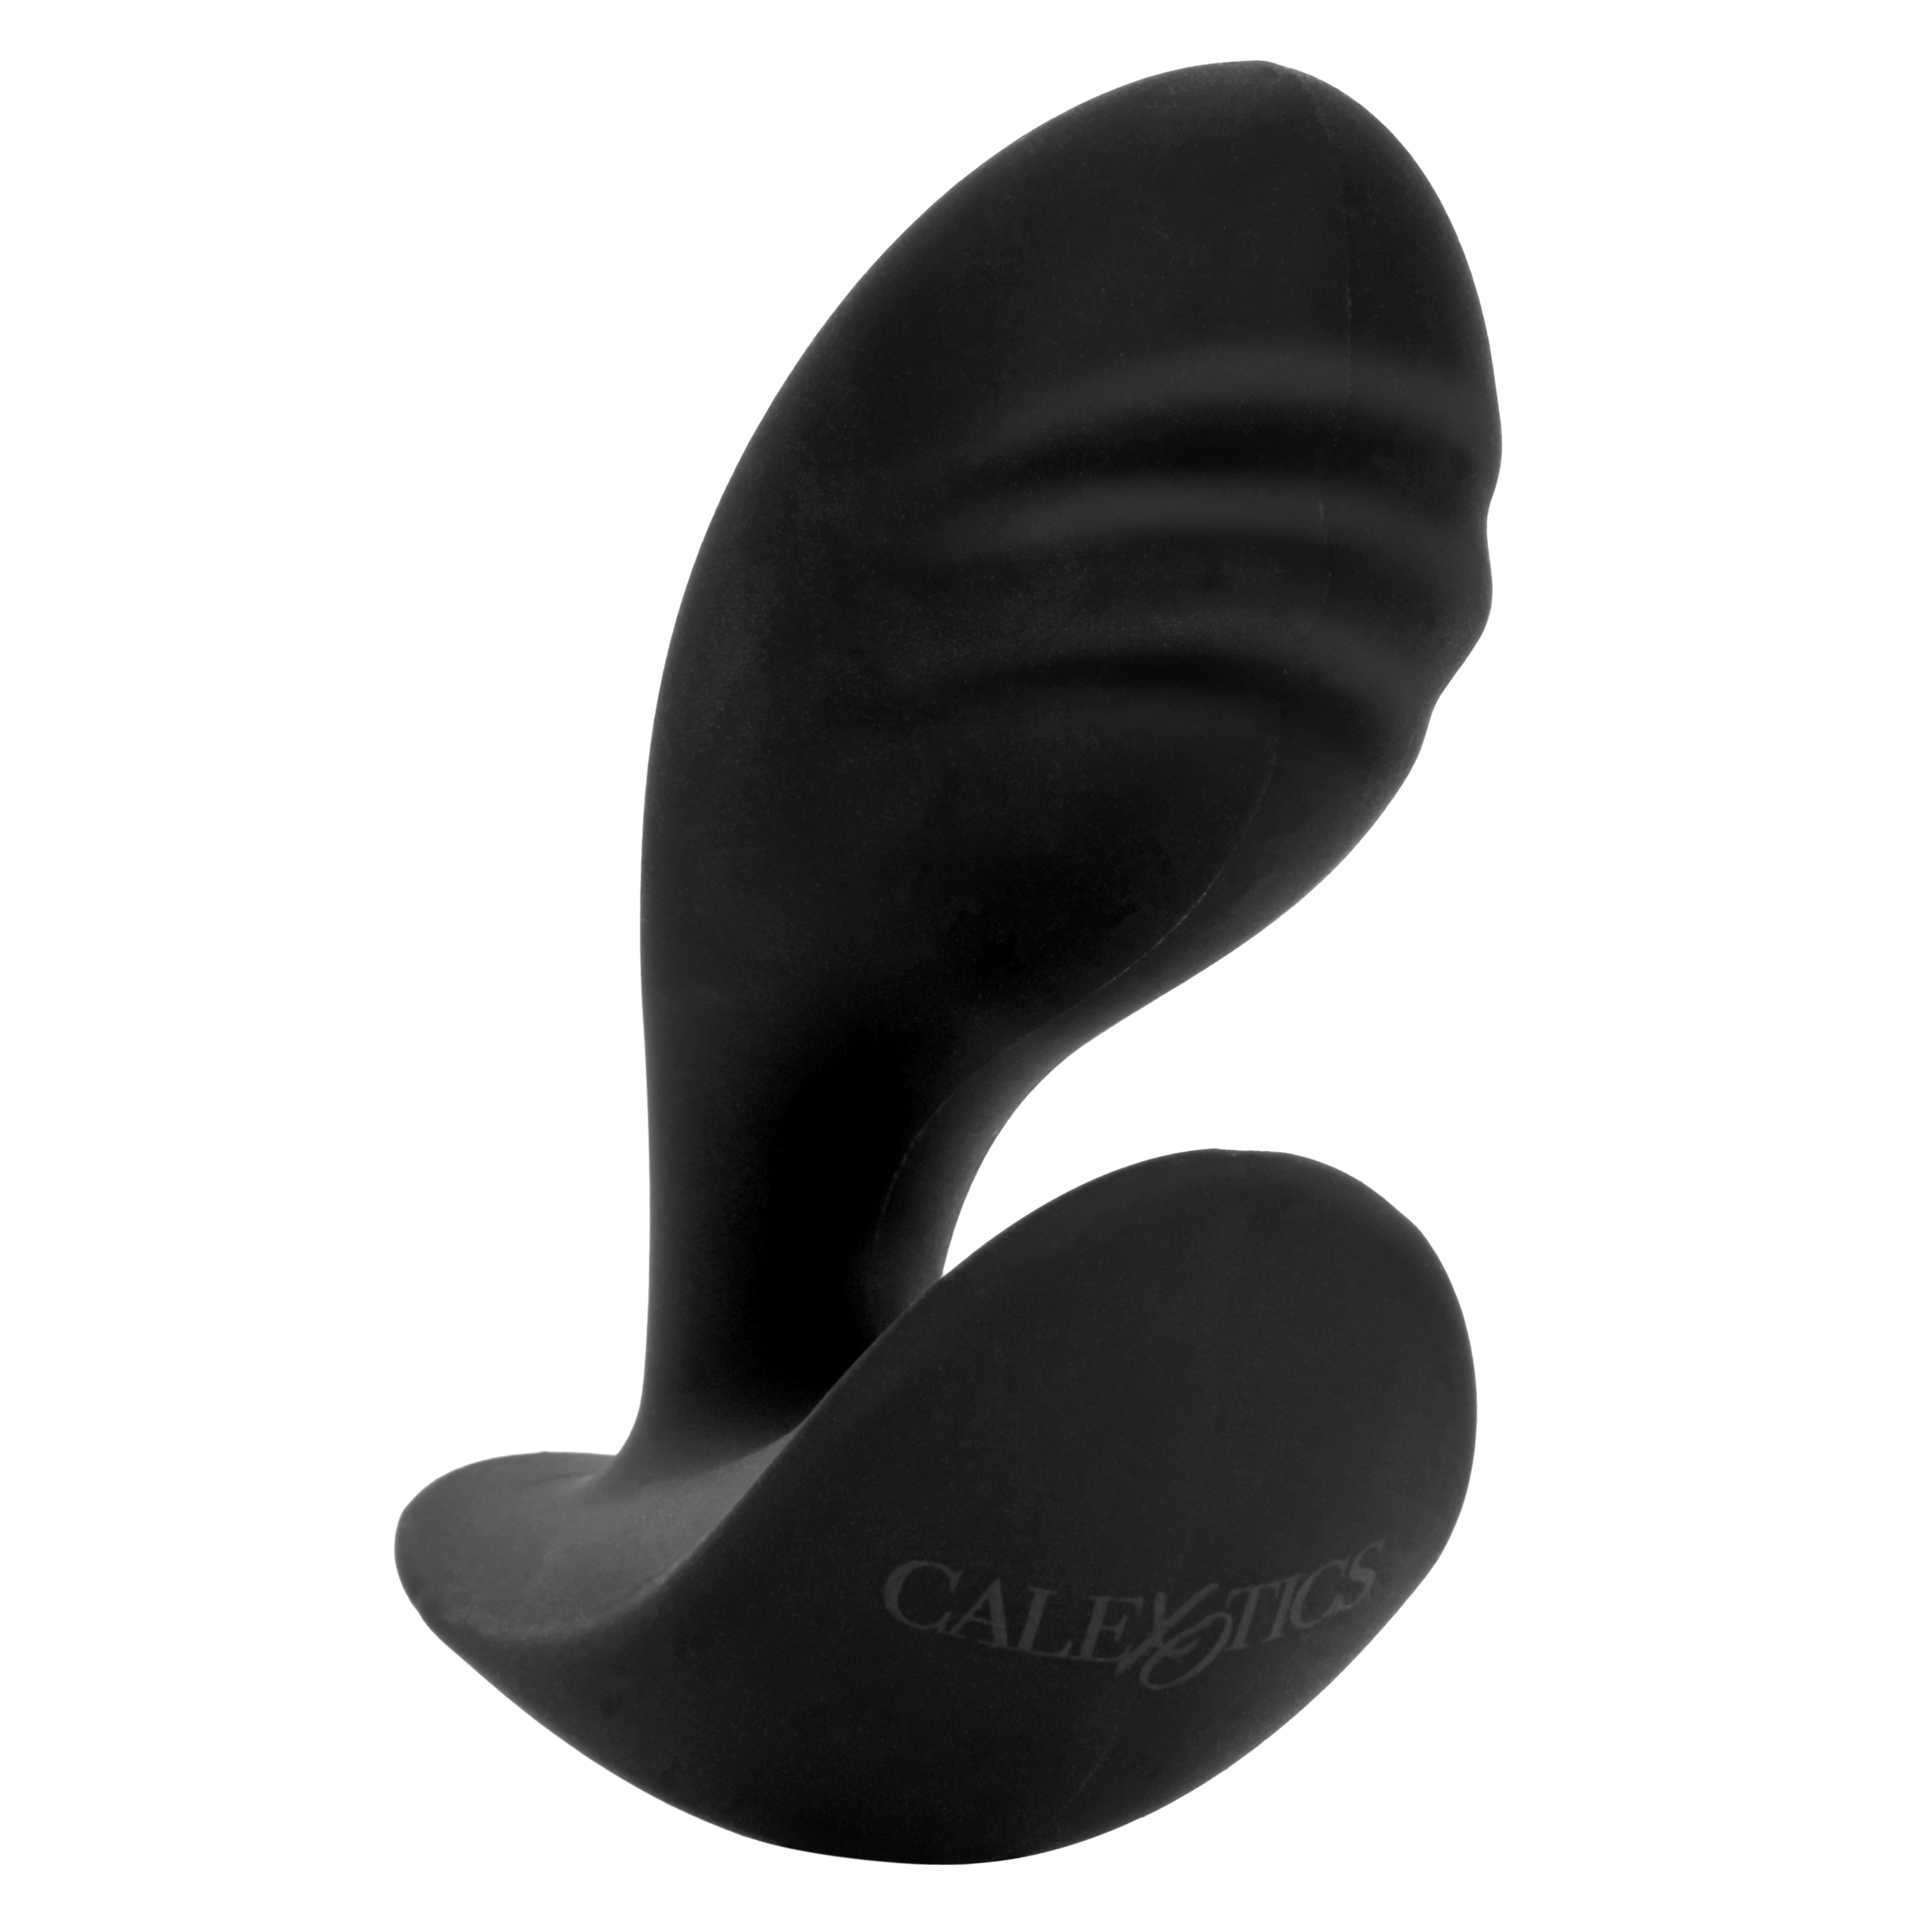 Booty+Call+Petite+Probe+Silicone+Anal+Plug+2.75+Inch